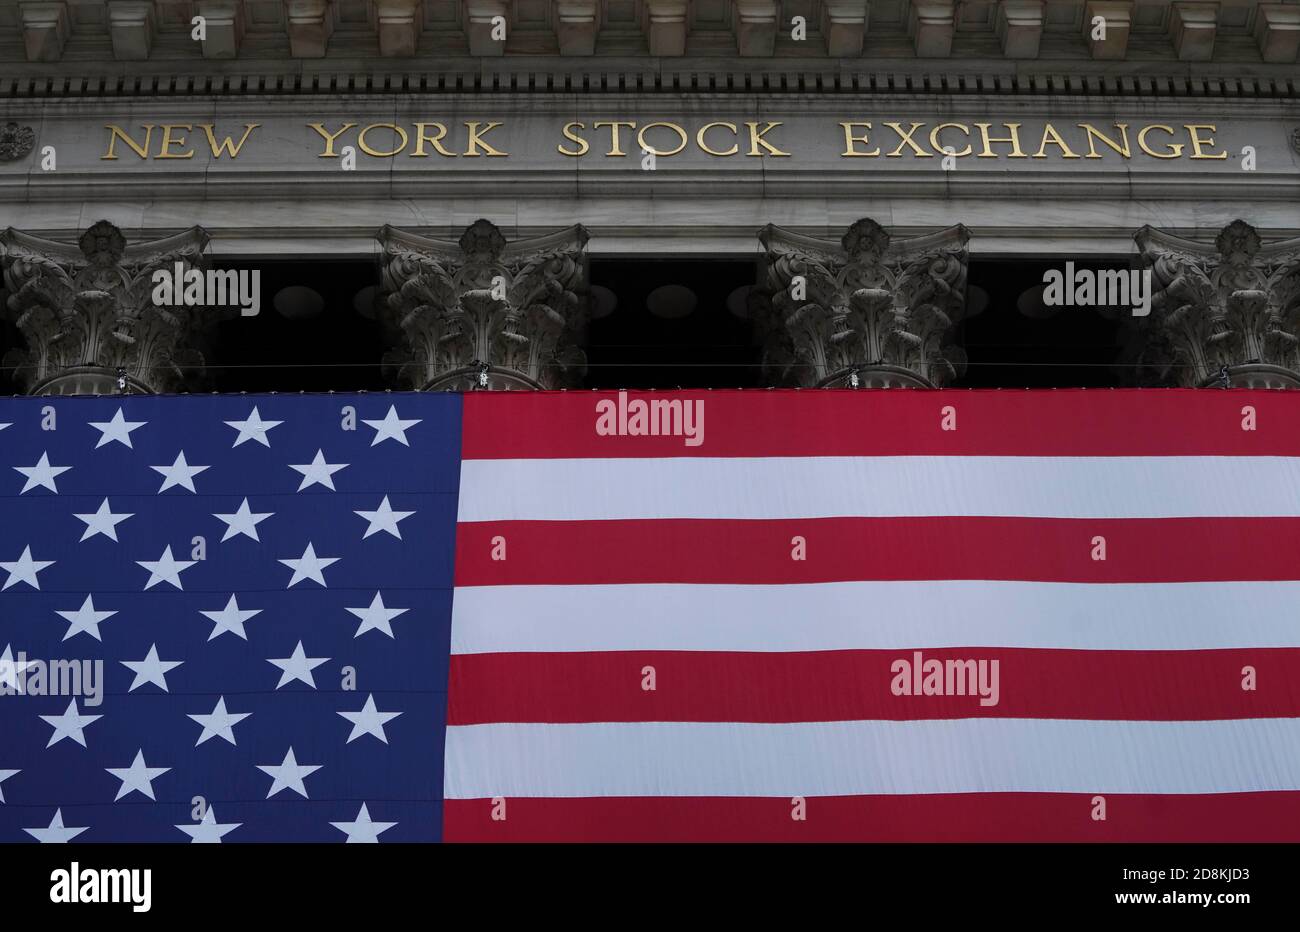 New York, USA. 30th Oct, 2020. Photo shows the building of New York Stock Exchange in New York, the United States, Oct. 30, 2020. U.S. stocks closed lower on Friday, as a pronounced slide in tech sector weighed on the market. The Dow Jones Industrial Average fell 157.51 points, or 0.59 percent, to 26,501.60. The S&P 500 was down 40.15 points, or 1.21 percent, to 3,269.96. The Nasdaq Composite Index shed 274.00 points, or 2.45 percent, to 10,911.59. Credit: Wang Ying/Xinhua/Alamy Live News Stock Photo